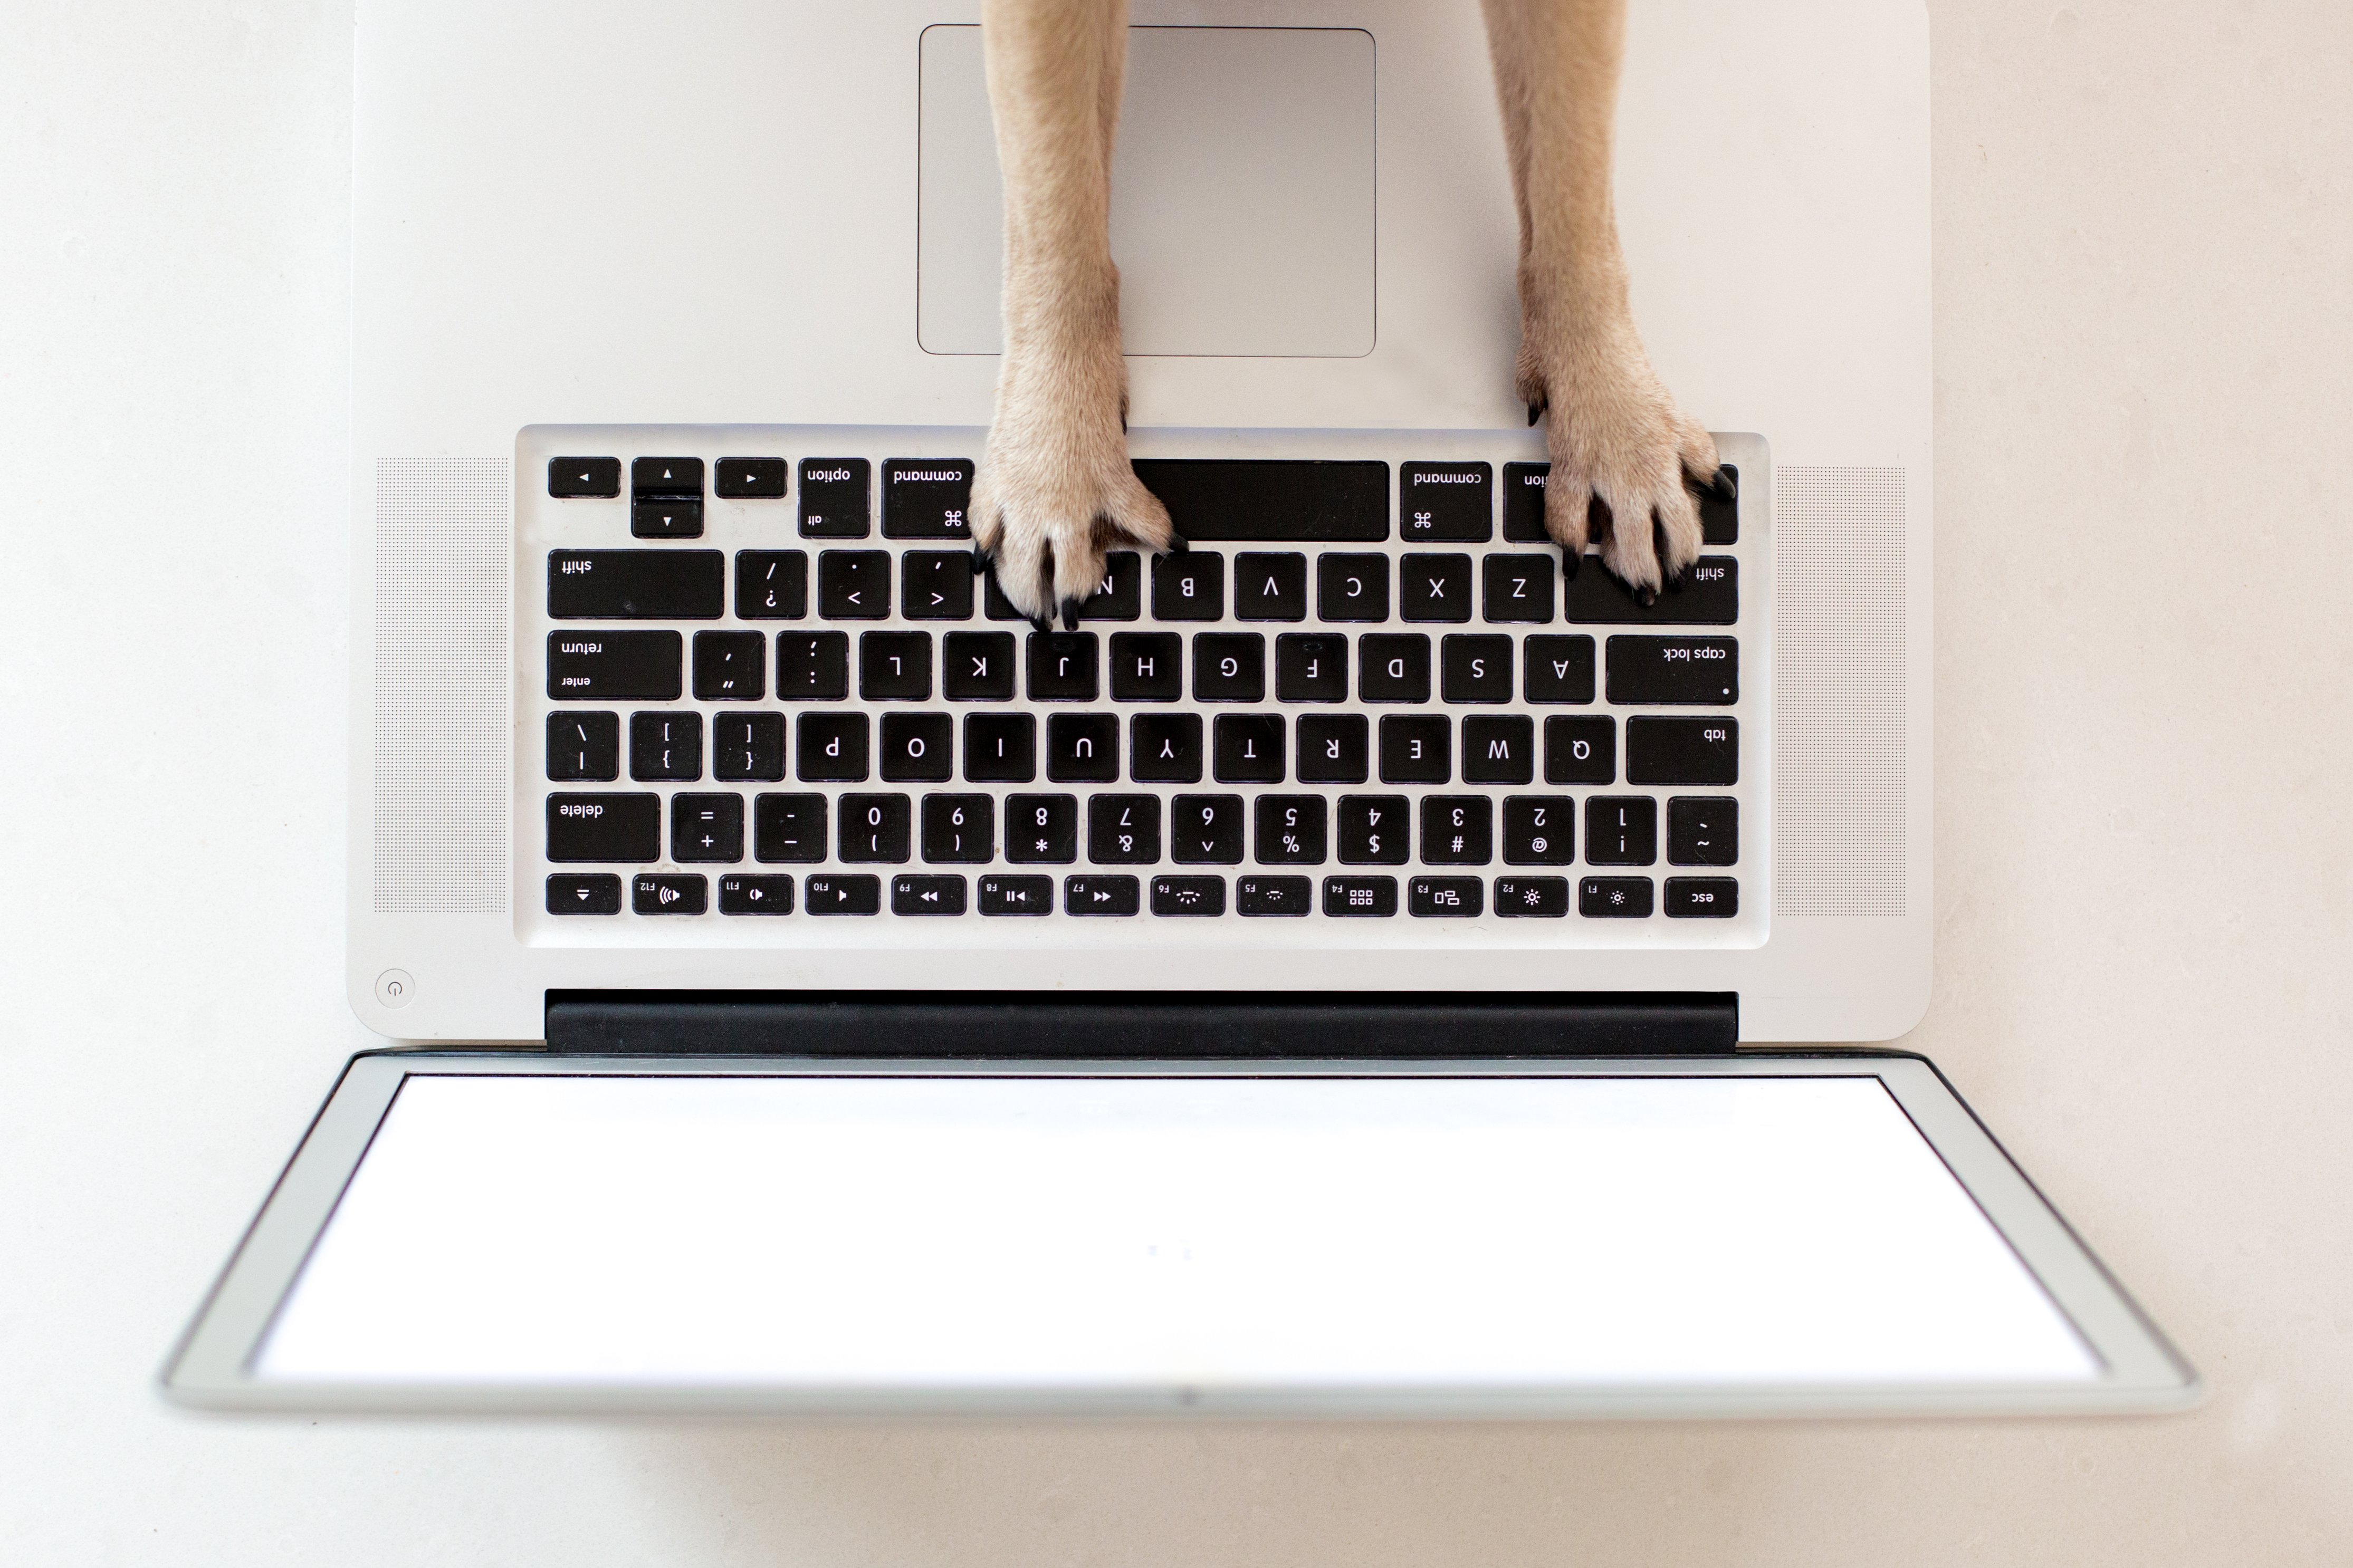 Dog with paws on keyboard